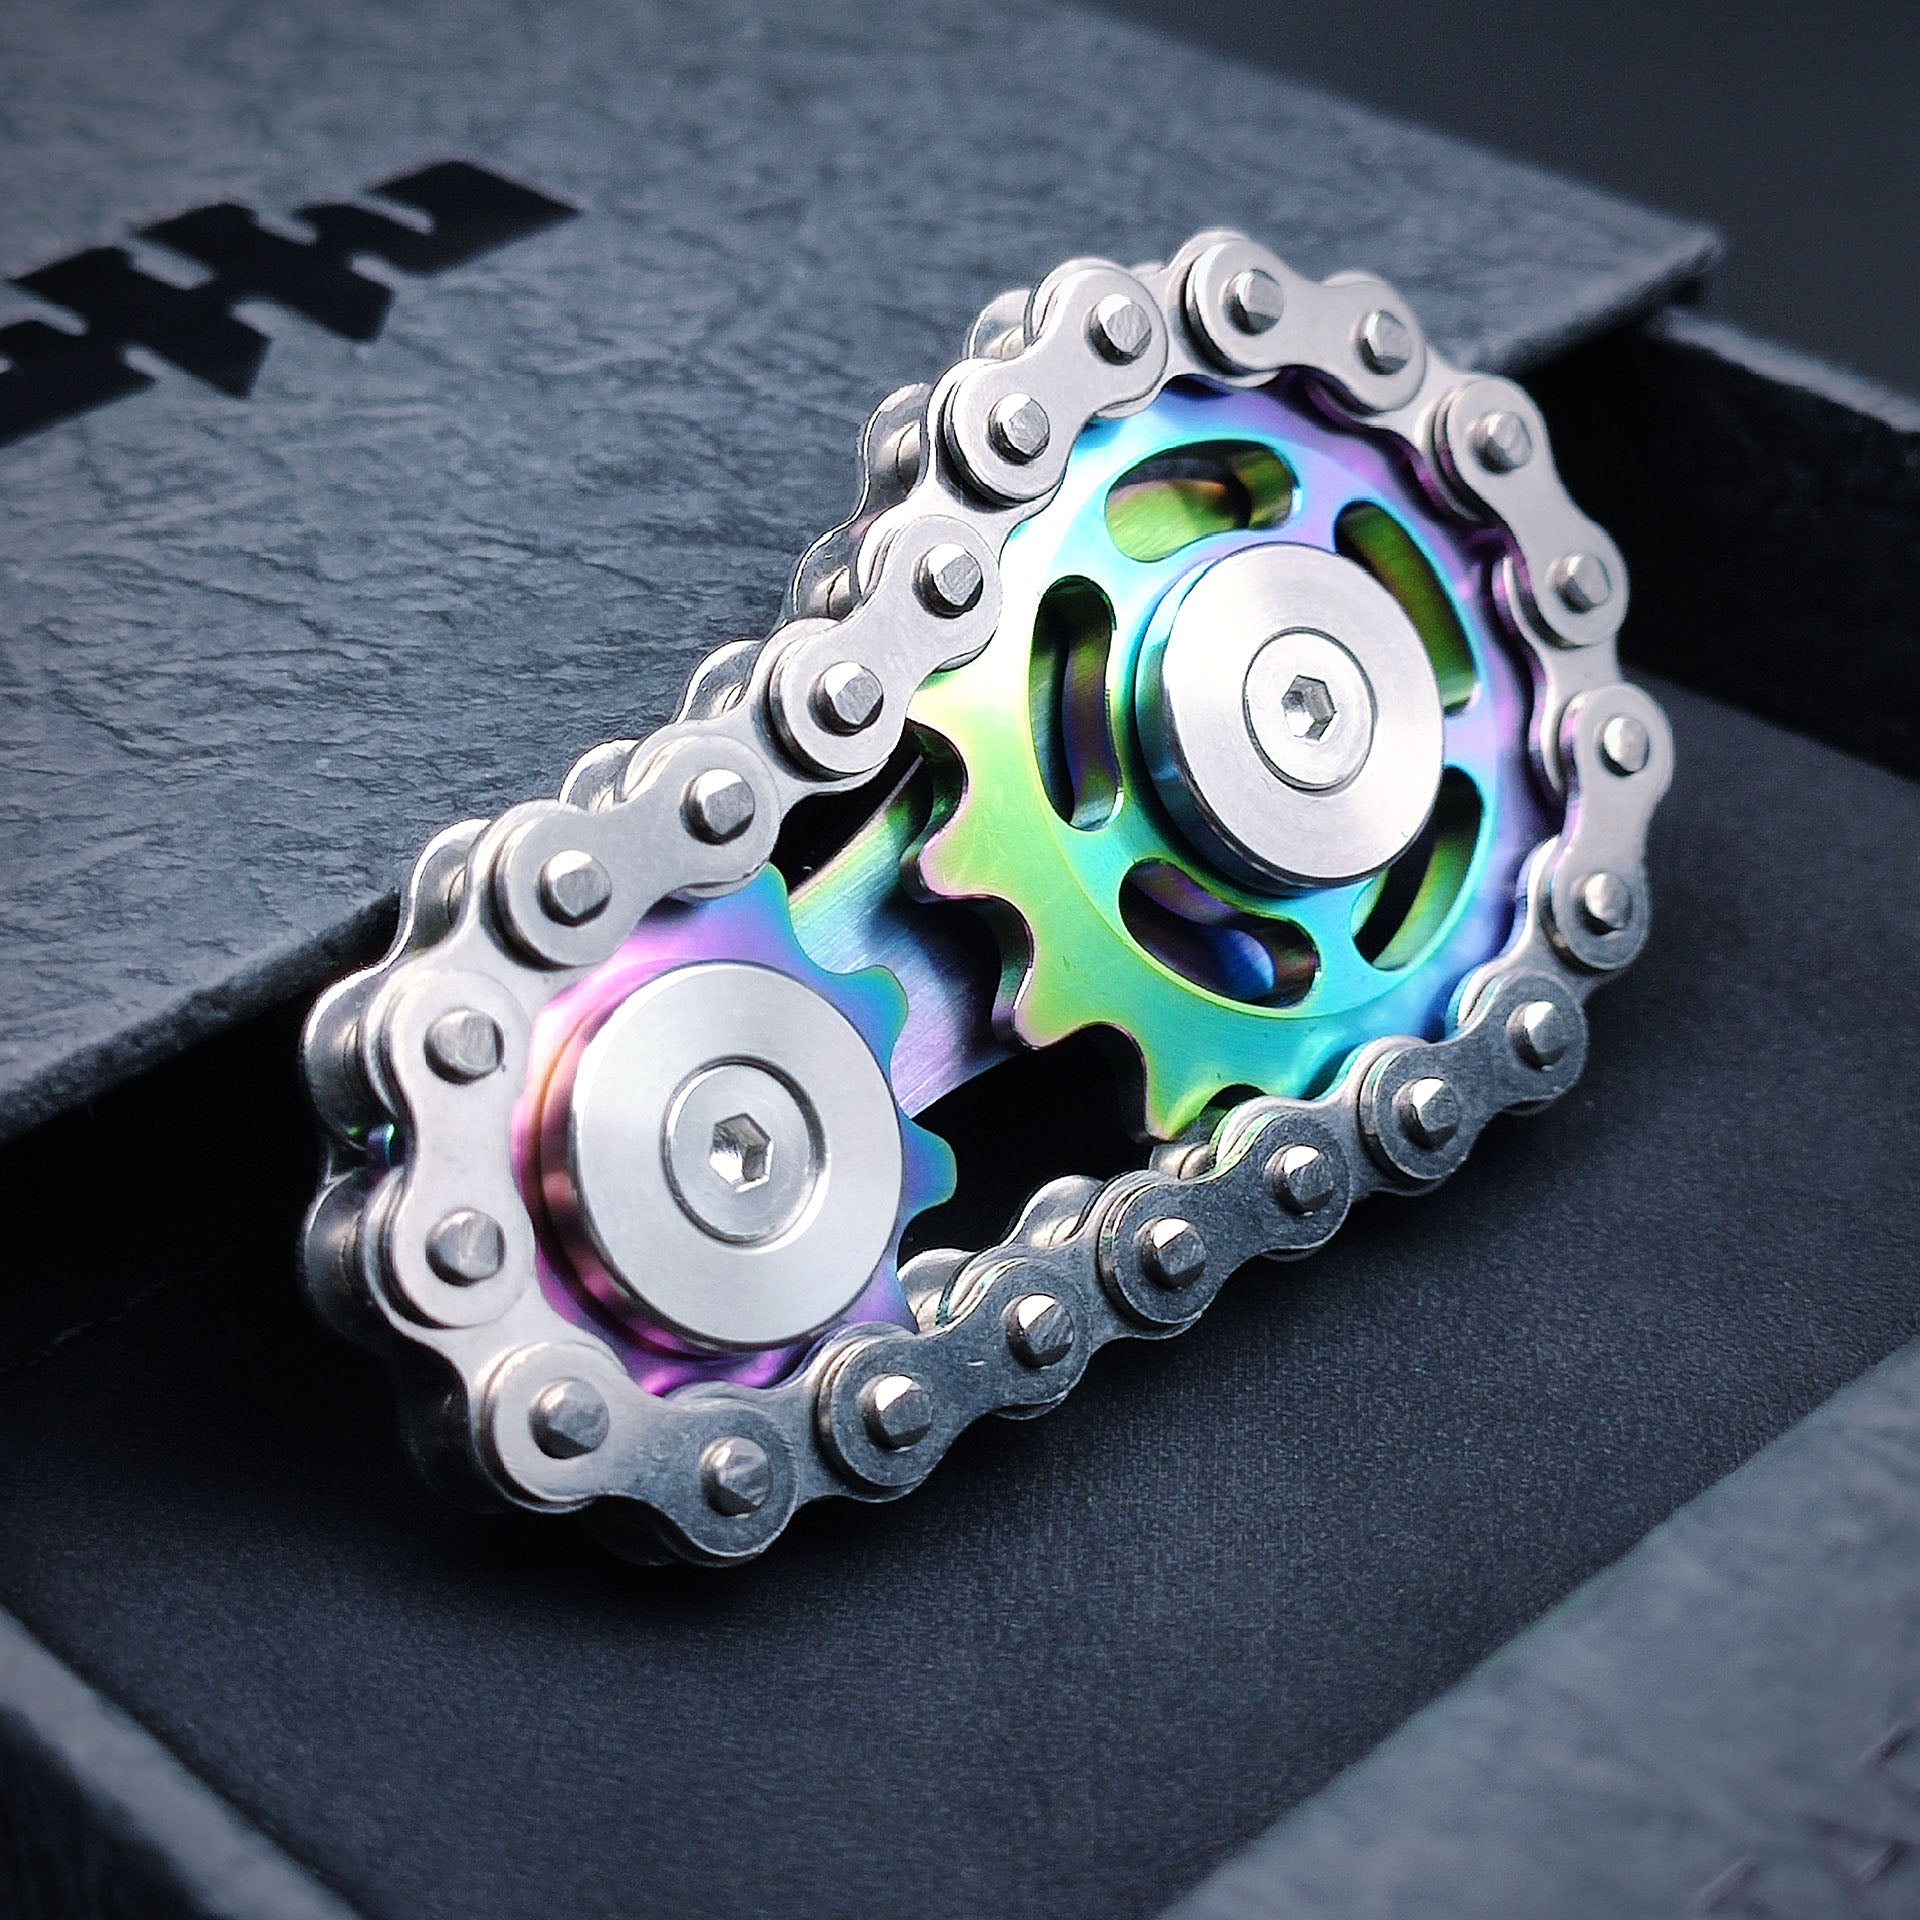 🔥Last Day Promotion 50% OFF🔥Stainless Steel Chain Fidget Spinner(BUY 2 GET FREE SHIPPING&EXTRA 20% OFF)